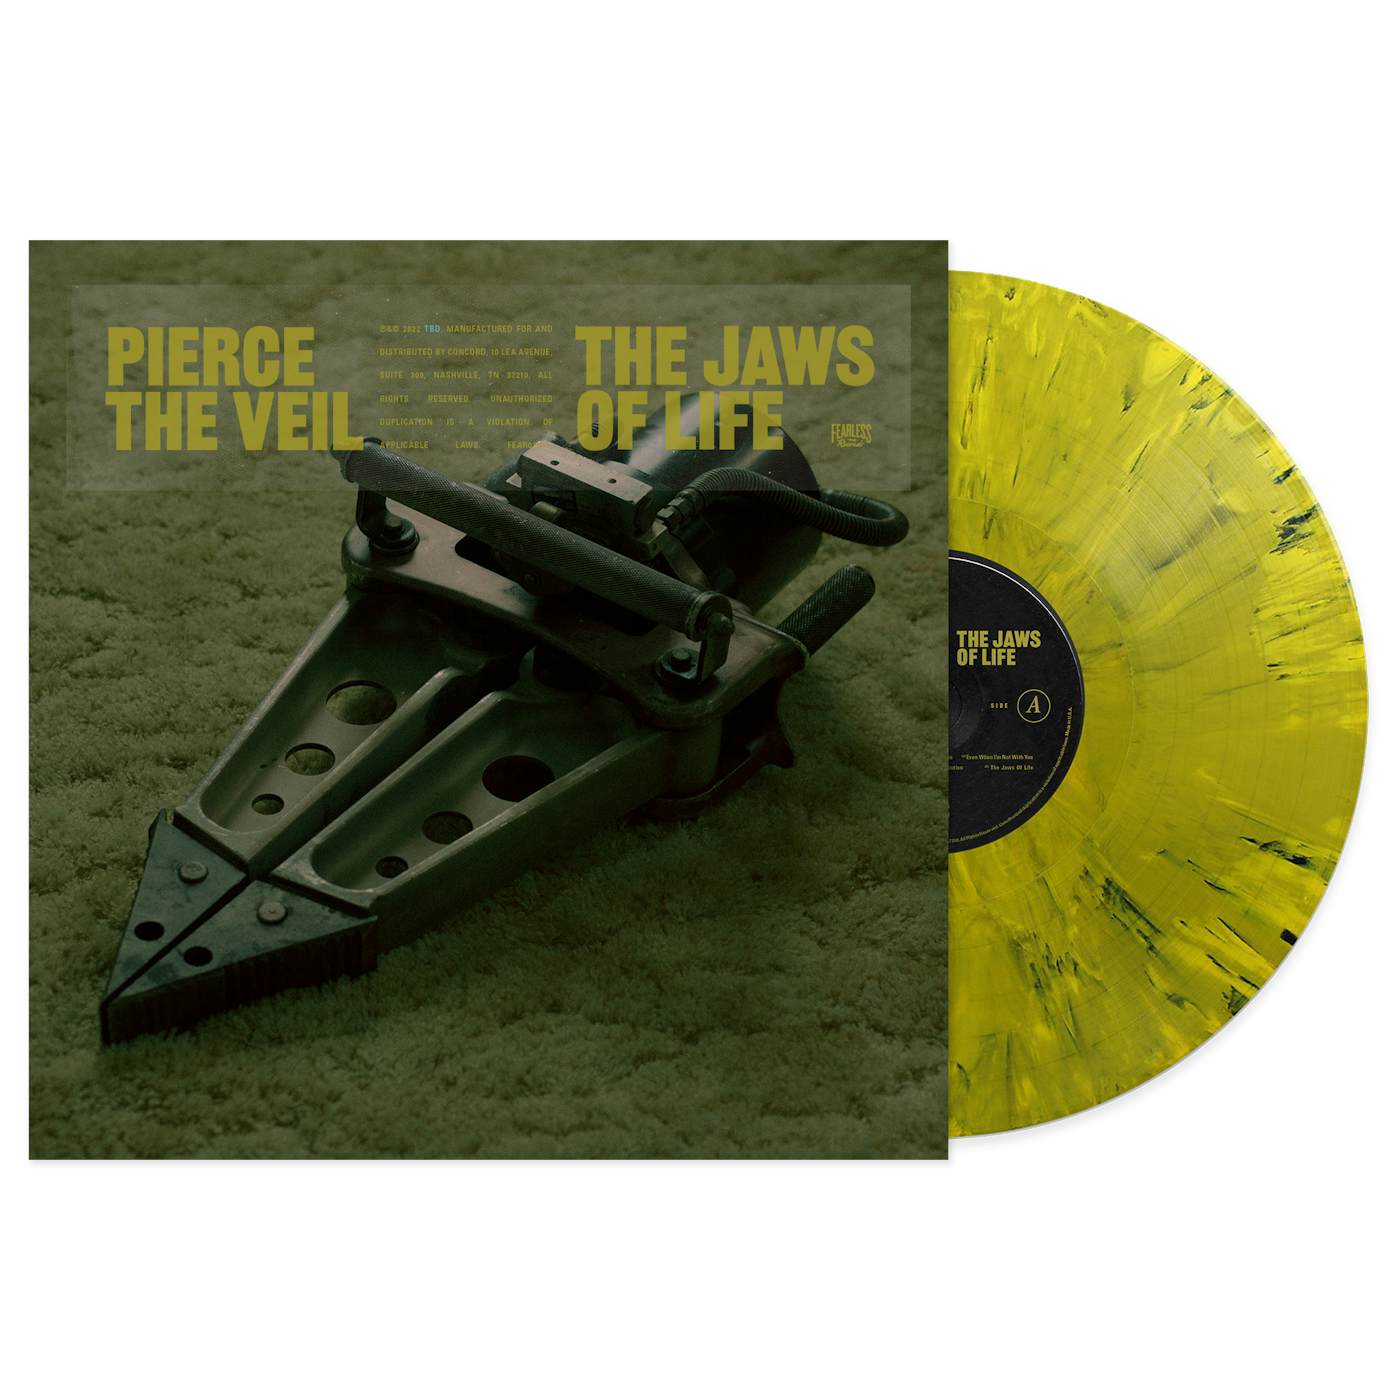 Pierce The Veil "The Jaws Of Life" Yellow And Black Marble Vinyl